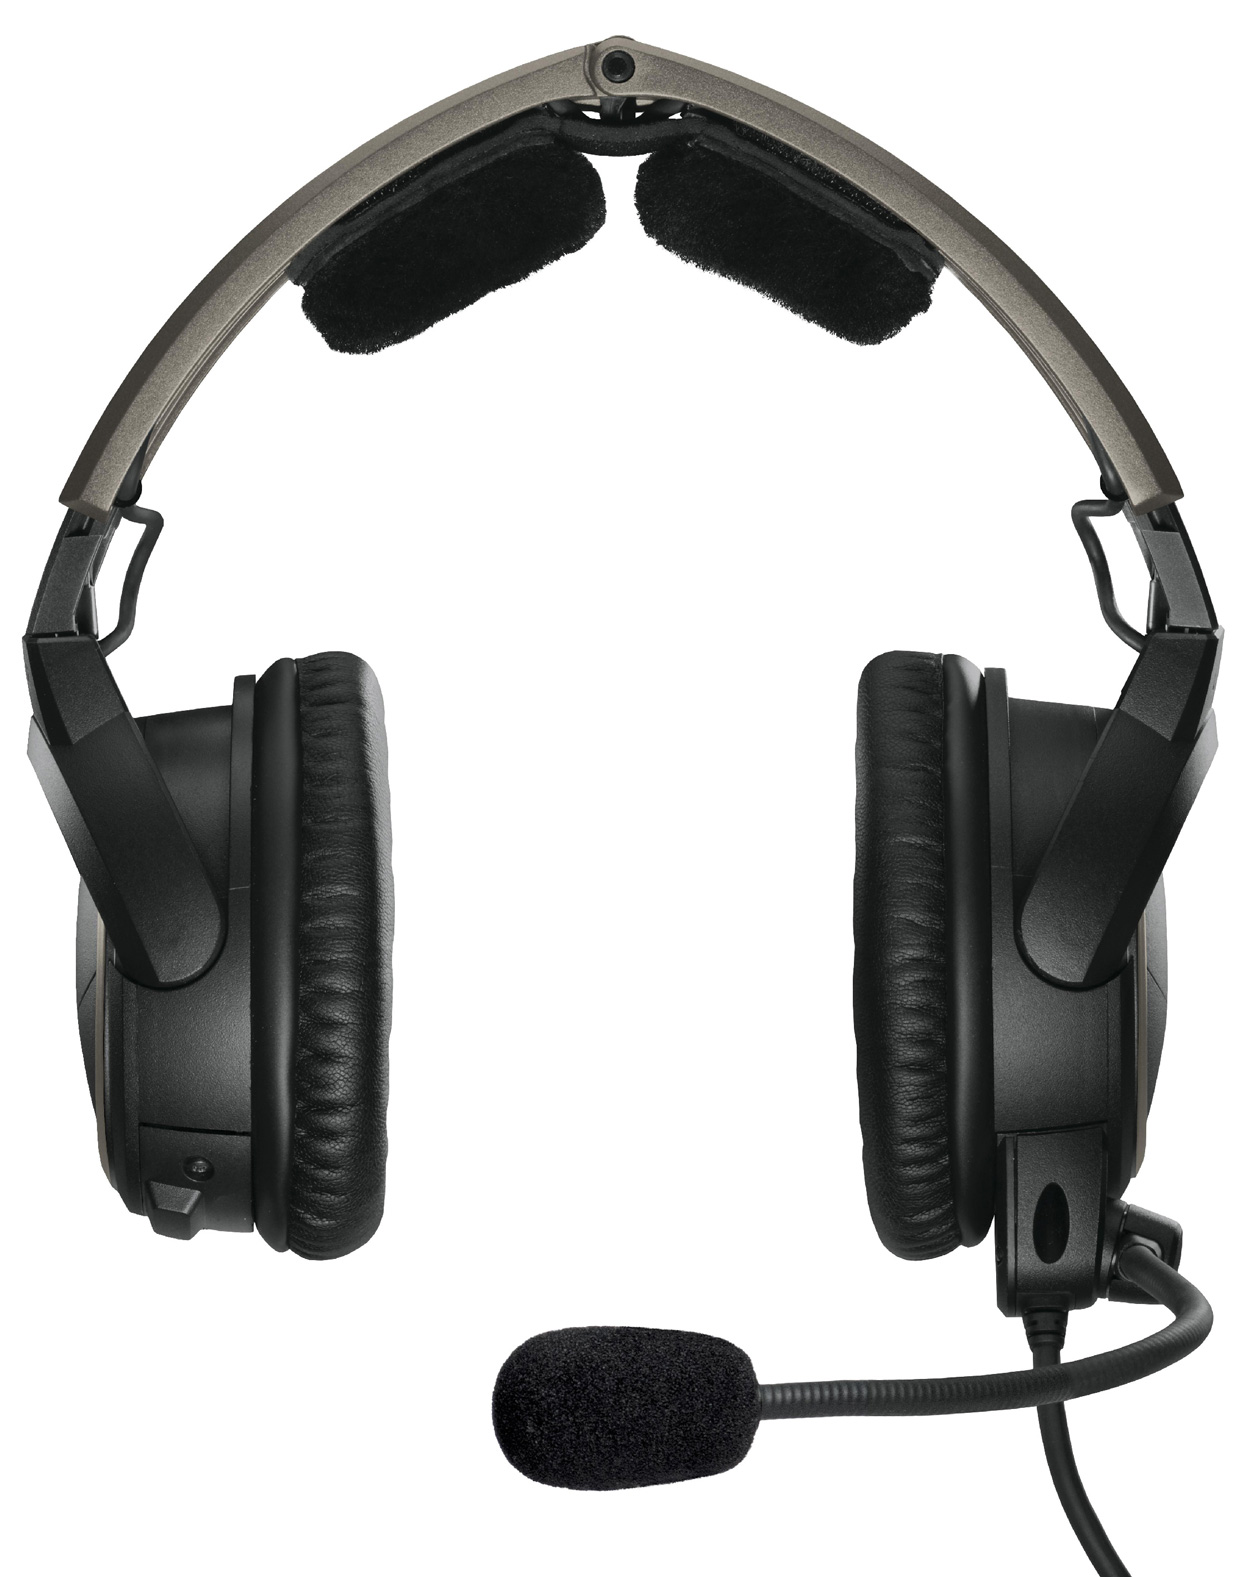 ANR - Bose A20 Fixed-Wing Headset with Twin Plugs, Non-Bluetooth, Battery powered, Hi Impedance (324843-2020)